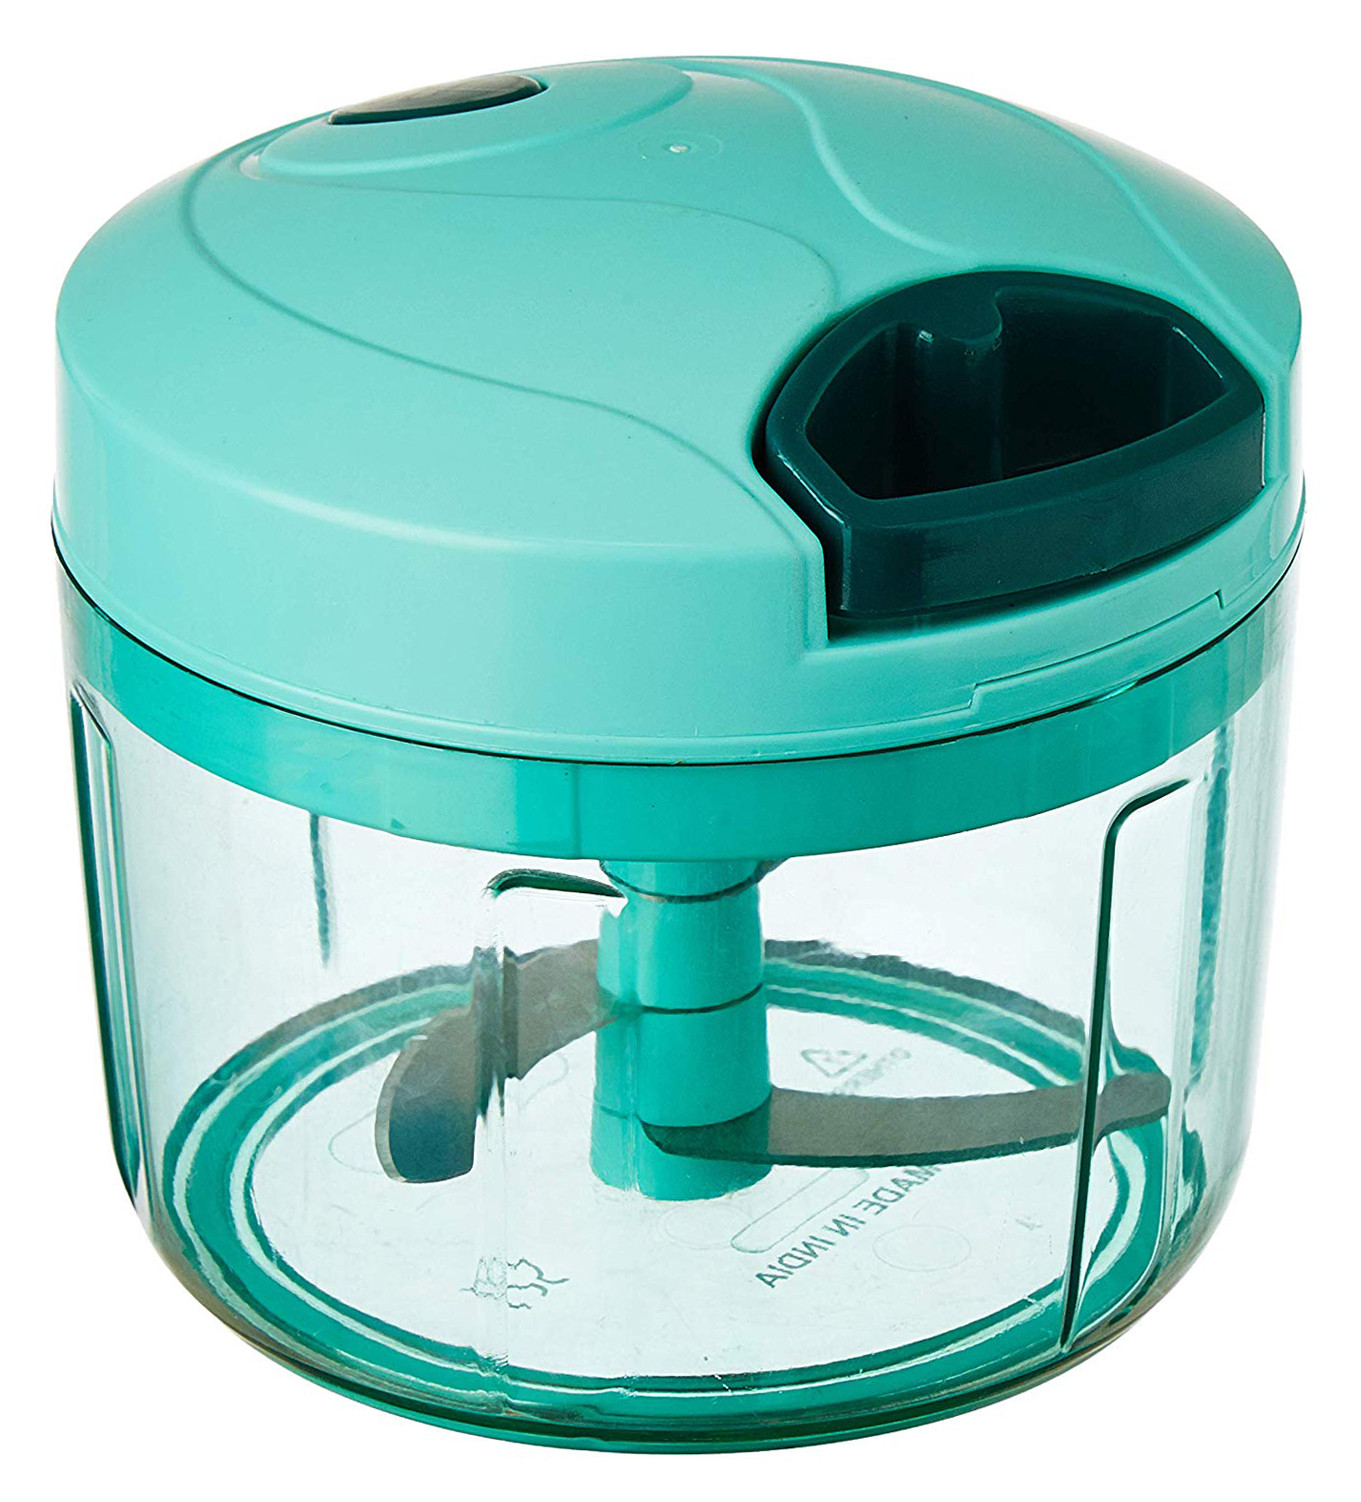 Kuber Industries Compact Vegetable Quick Chopper with 3 Blades,650 ML, (Green)-KUBMART1330